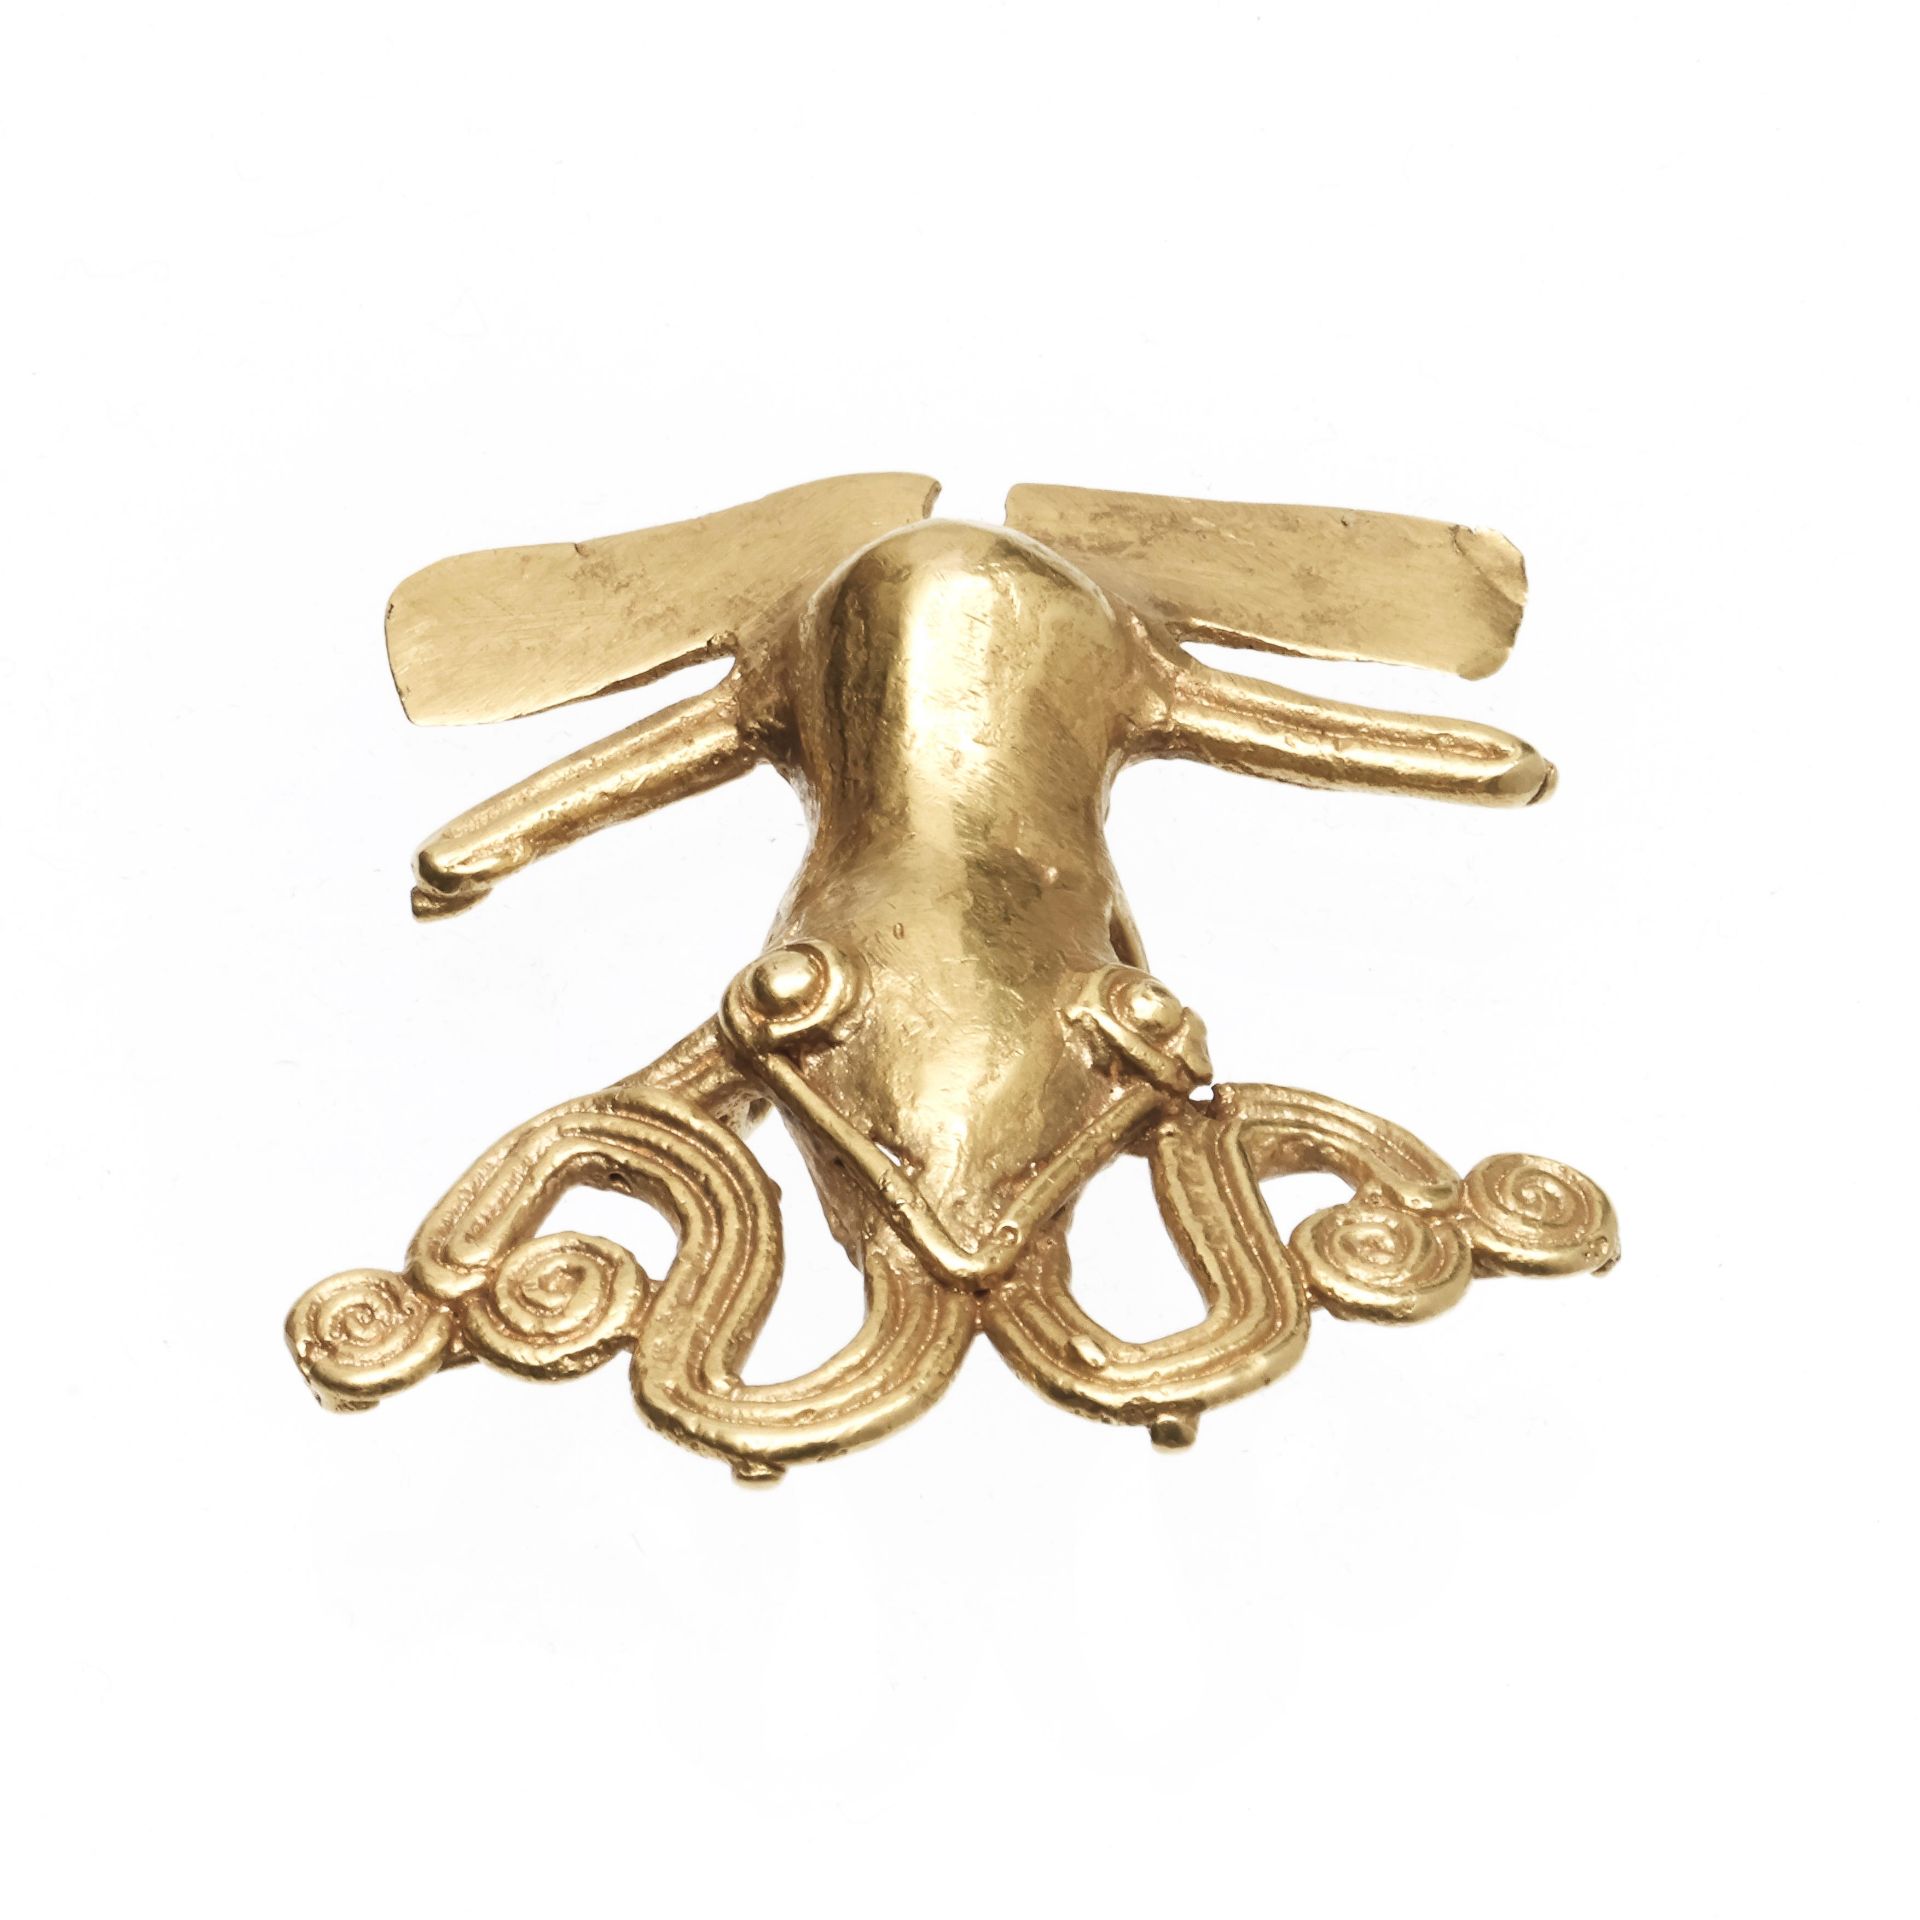 Panama, Veraguas, 11th-16th century AD, 18 kt gold pendant in the form of a frog. - Bild 3 aus 4